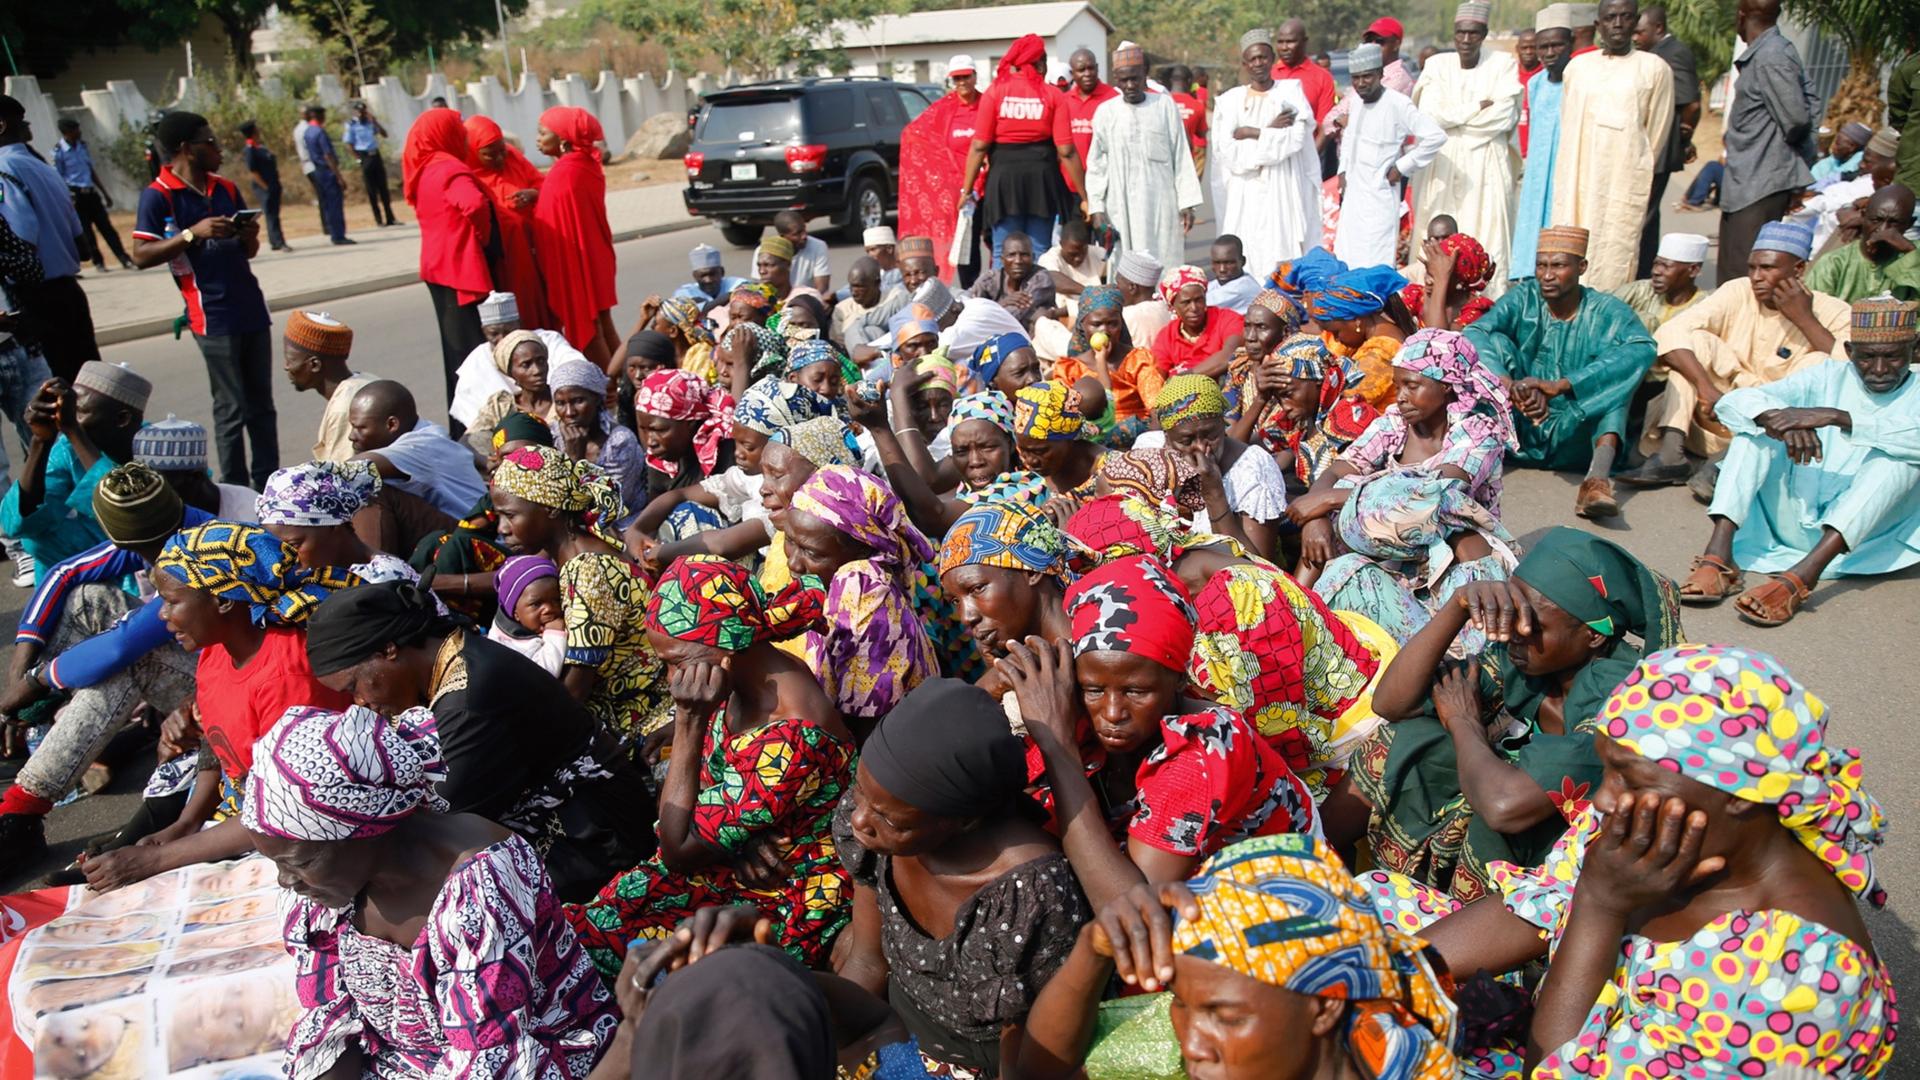 Some of the Chibok schoolgirl's parents protest in Abuja, Nigeria, in January 2016, nearly two years since the abduction of their daughters by Boko Haram militiamen.